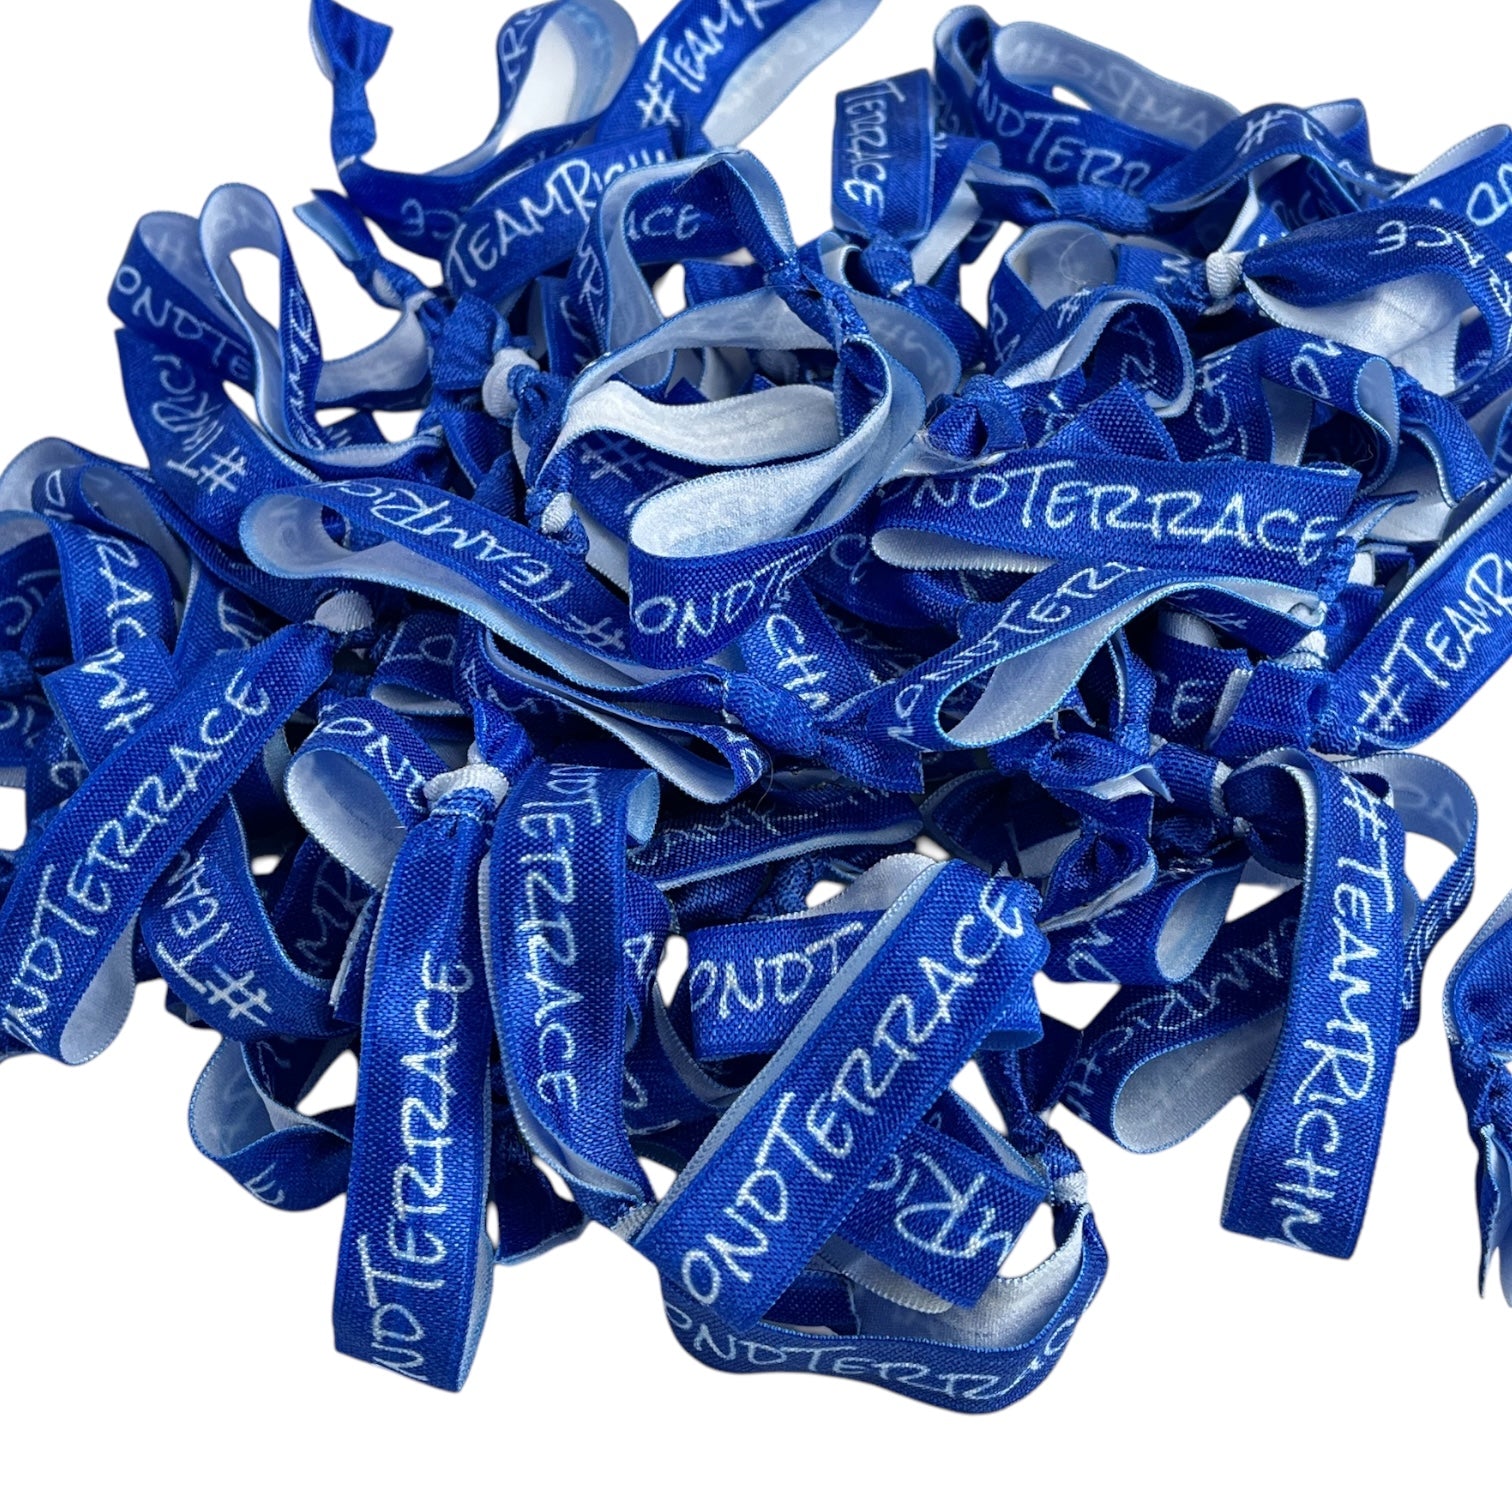 Custom Volleyball, Cheer, Sports Event Promotional Hair Tie Bracelets - Add your logo and information - Bulk Discounts!